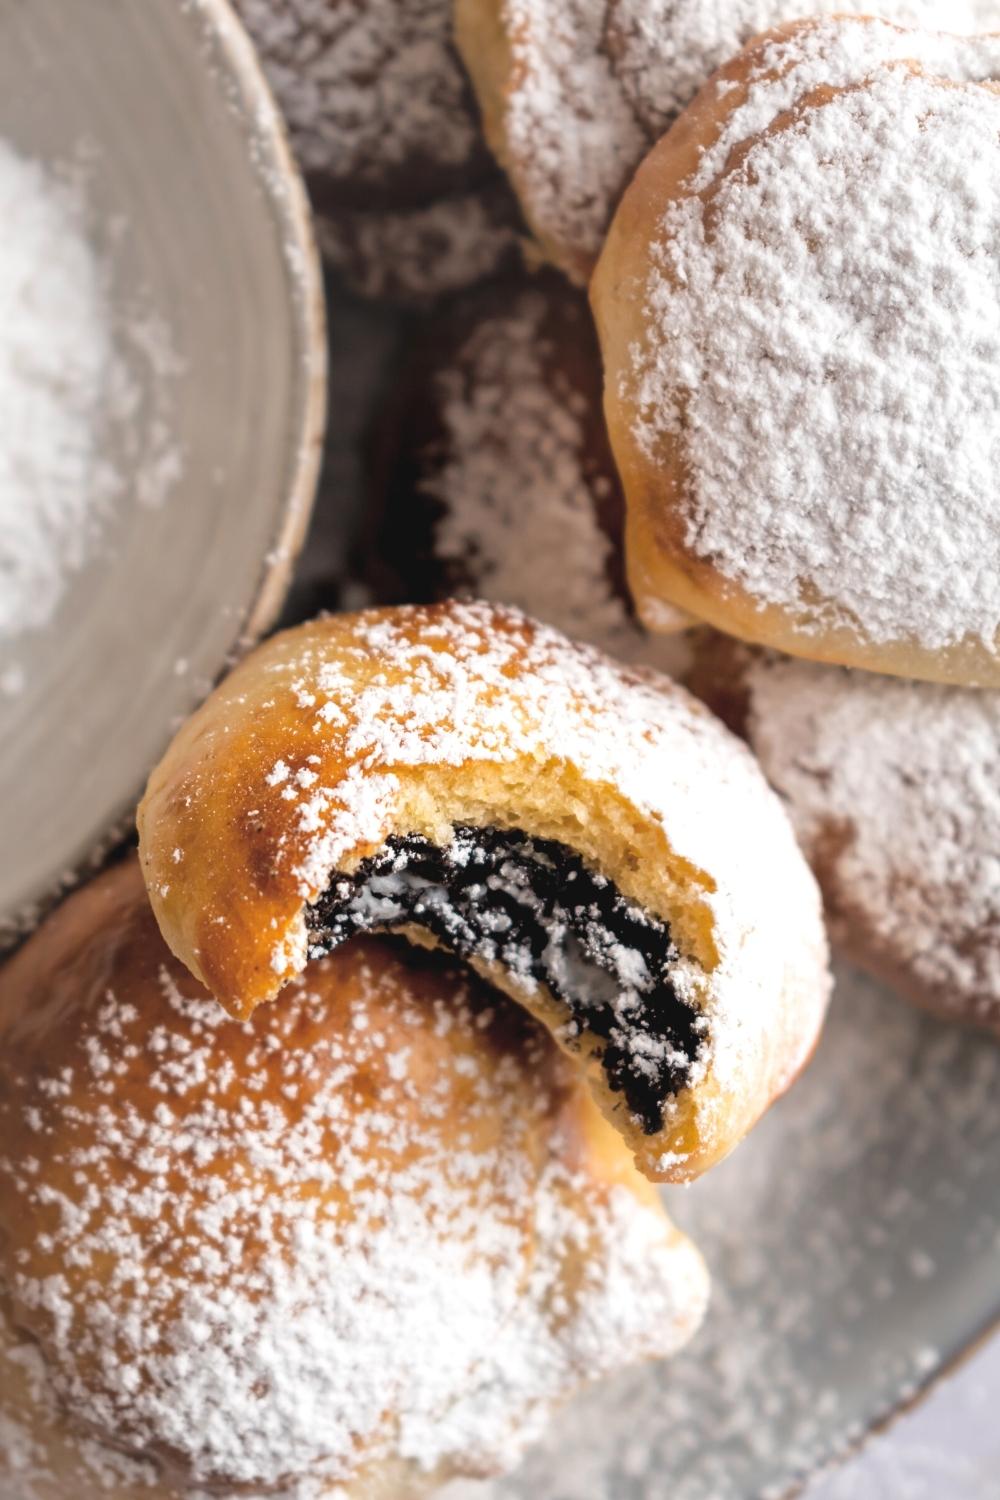 Air fryer fried Oreo with a bite out of the front of it.